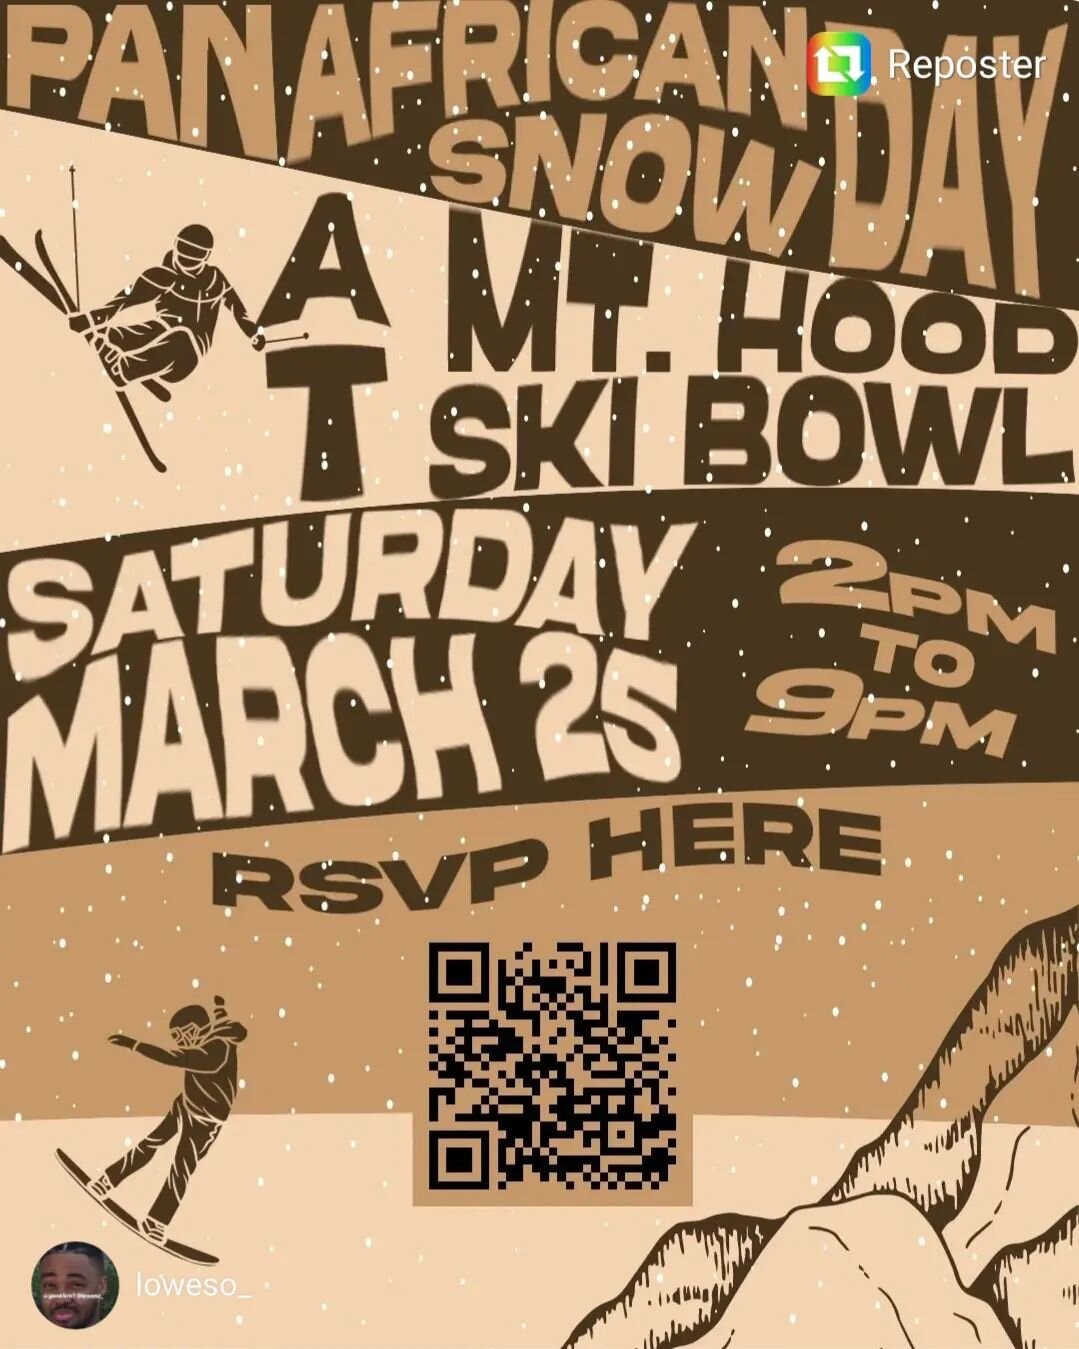 Bong Bong to @loweso_  for setting it off again

Wassup, we're running it back! After the great turnout and riding last month we're back! This coming Saturday, March 25th from 2pm-9pm we will be riding at Mt. Hood SkiBowl. Let's ride, chill and have 